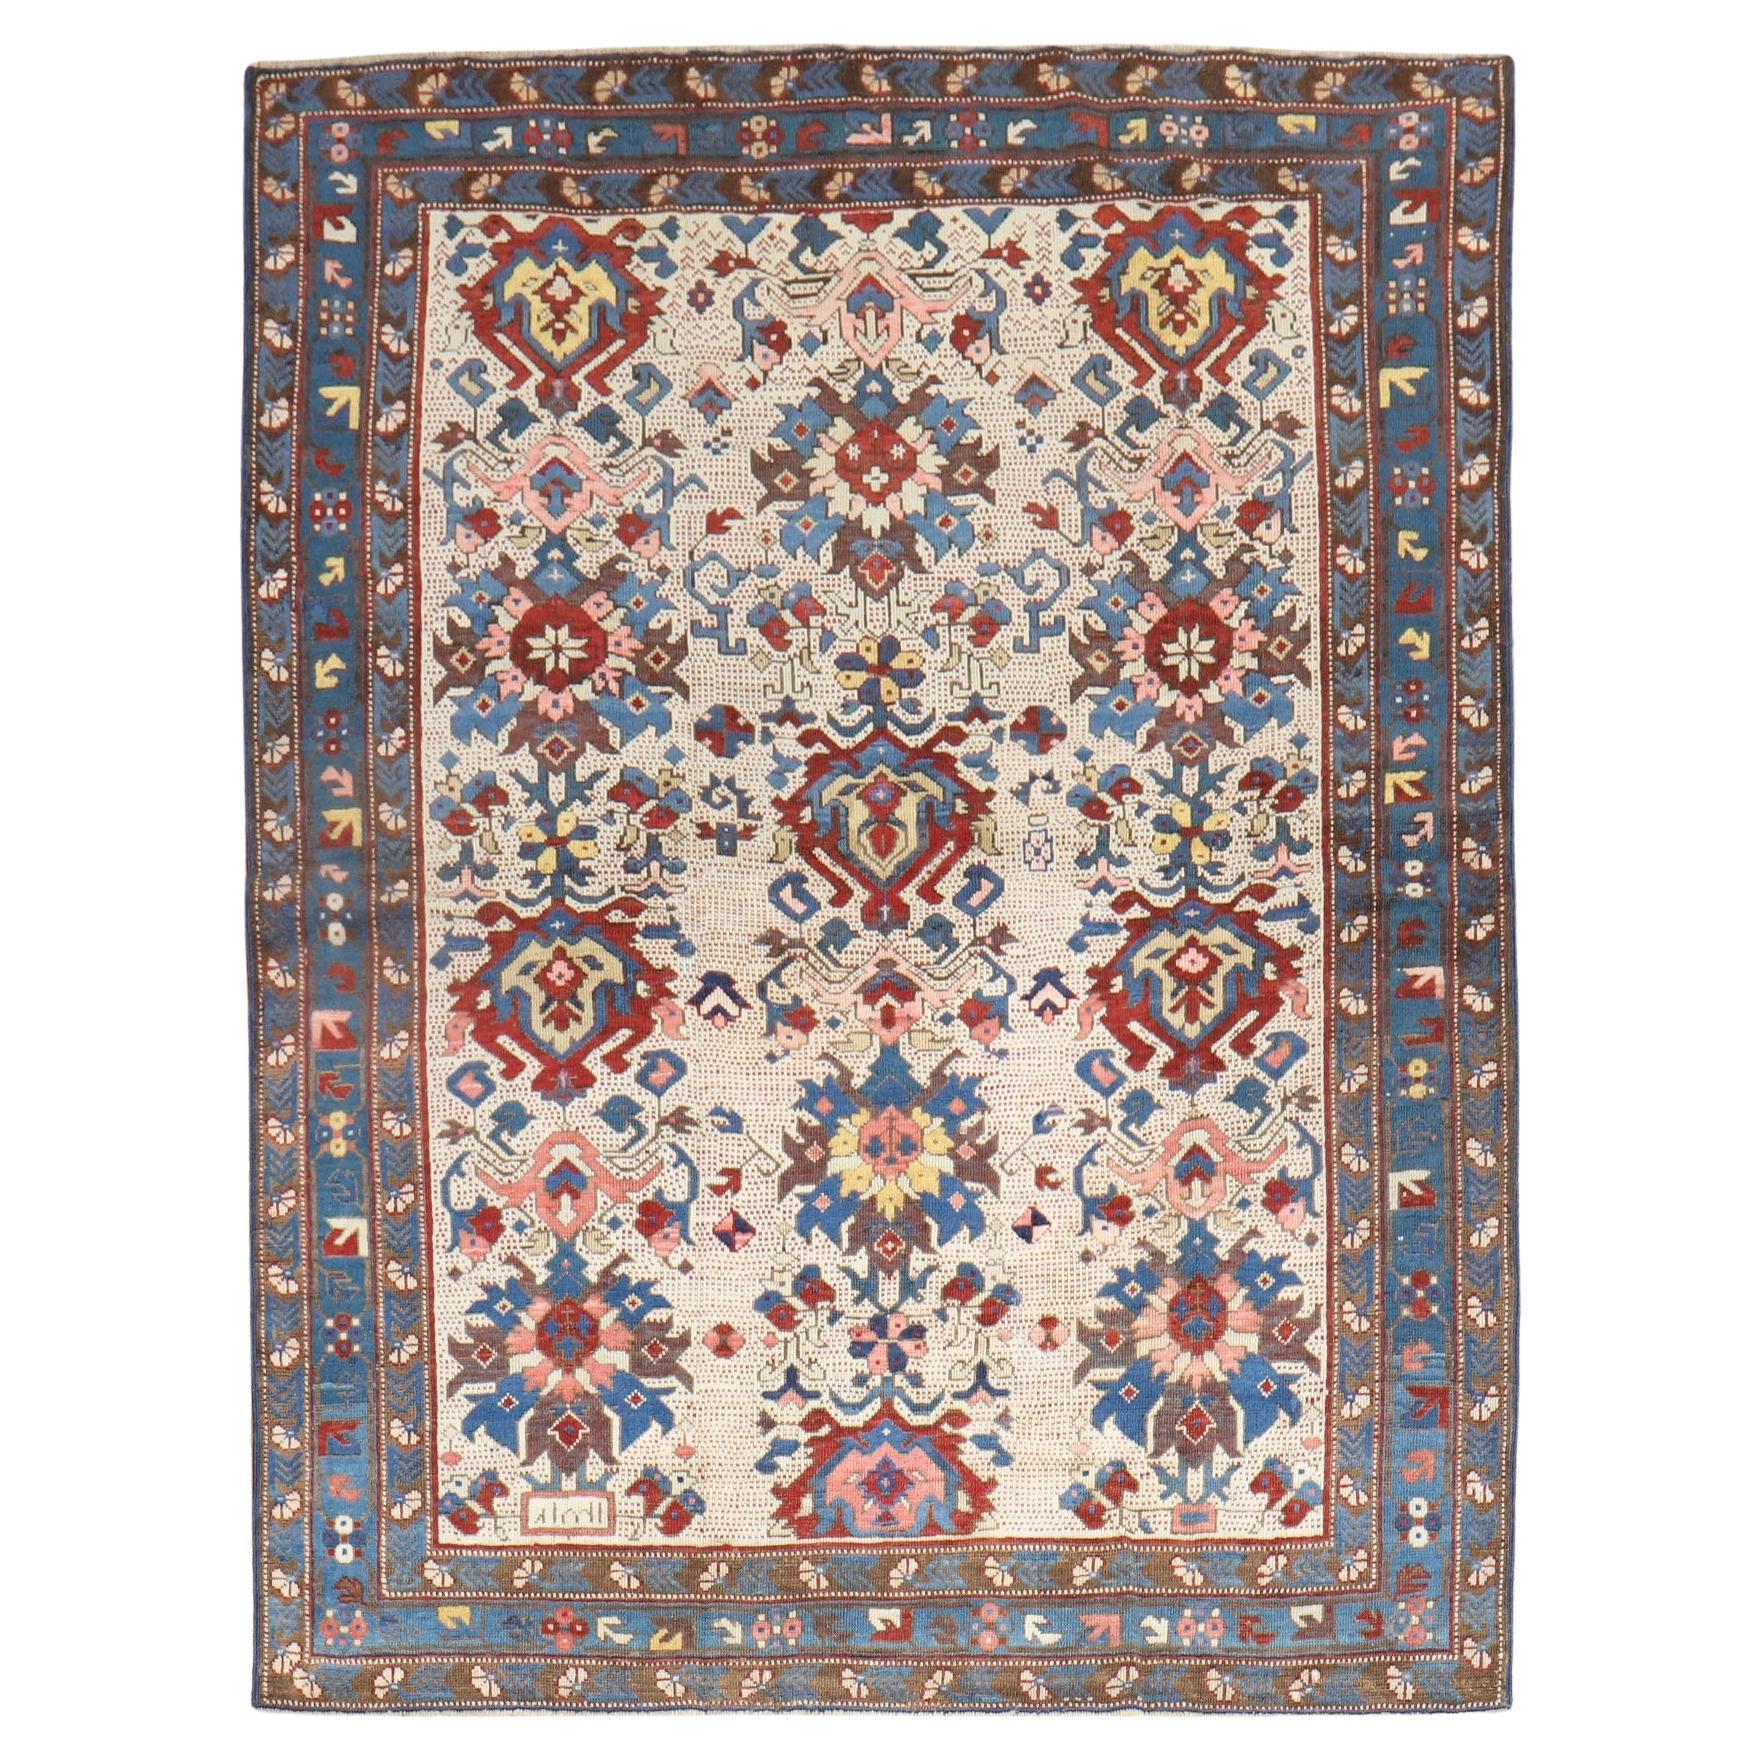 A late 19th-century Caucasian Zeychour Kuba rug.

Measures: 4.3'' x 5.3''

A subtype of the Kuba rug, antique Seychour (also known as Seichur and Zeychour) rugs are made in the small town of Yukhari-Zeykhur in Azerbaijan in the Northeast